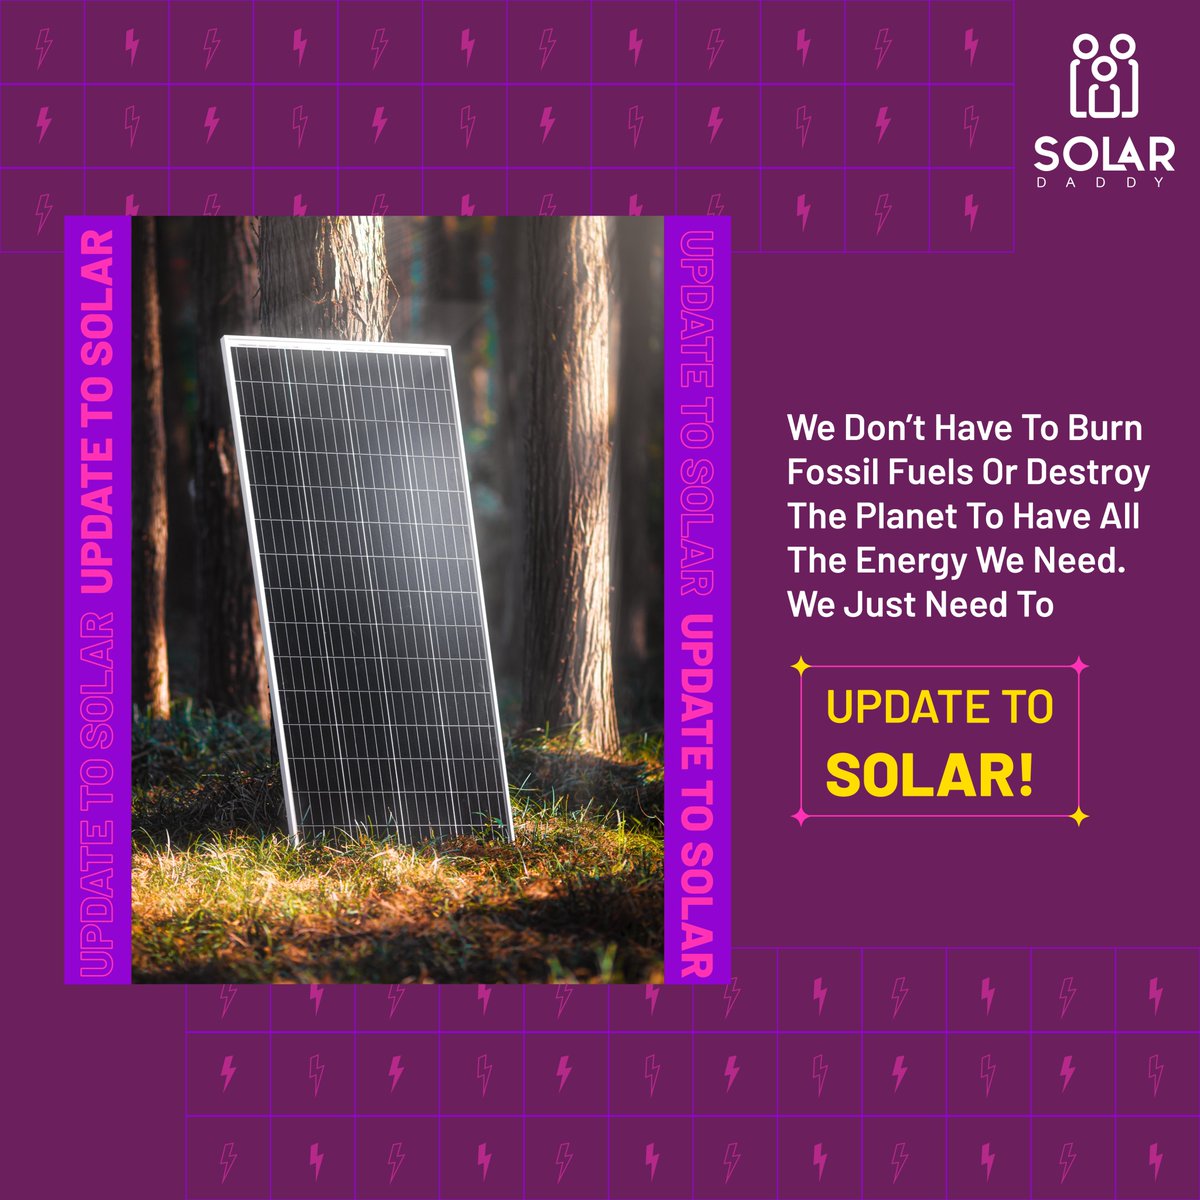 Solar Power - The Key to a
Sustainable Future Without Fossil Fuels

#solardaddy #solarenergysolutions #uksolarenergy
#solaruk #solarenergyuk #solarpoweruk #solarpanelinstallations #solarpanelsuppliers #solarenergyforlife #solarpanels #solarenergyworld #postofthedays